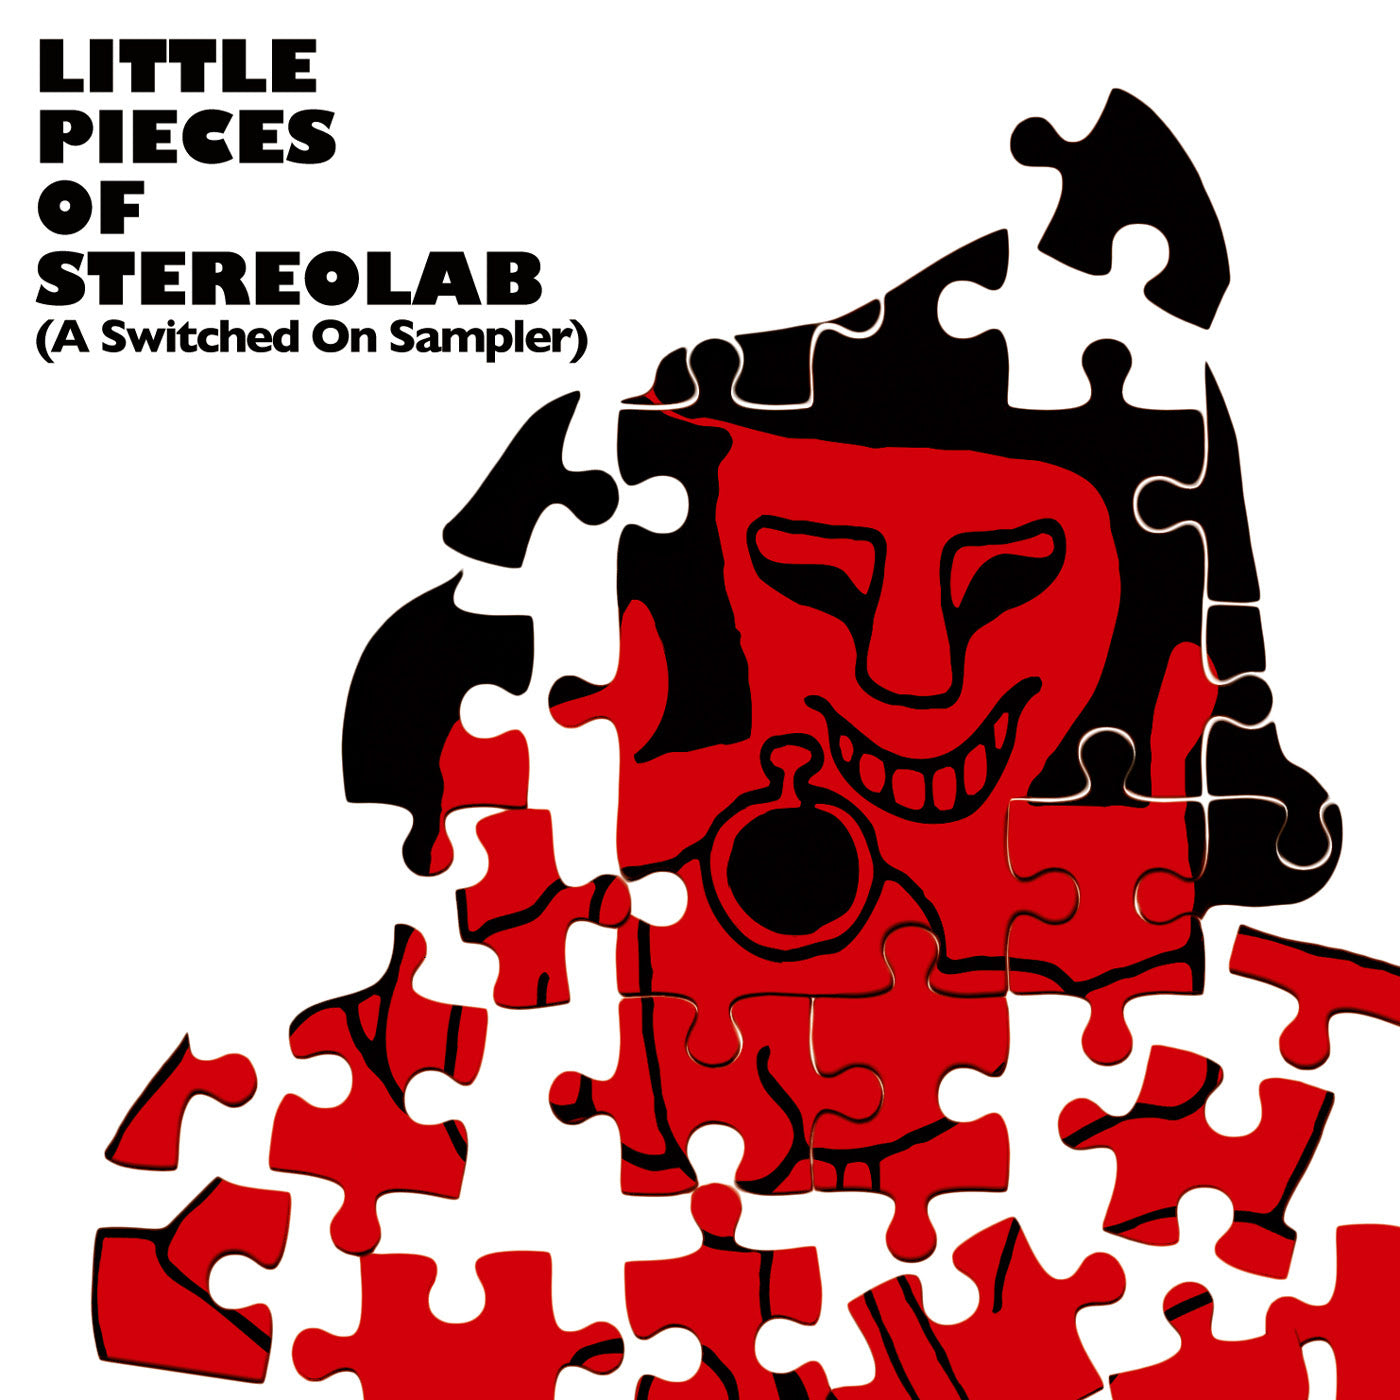 Stereolab - Little Pieces of Stereolab | Buy the CD from Flying Nun Records